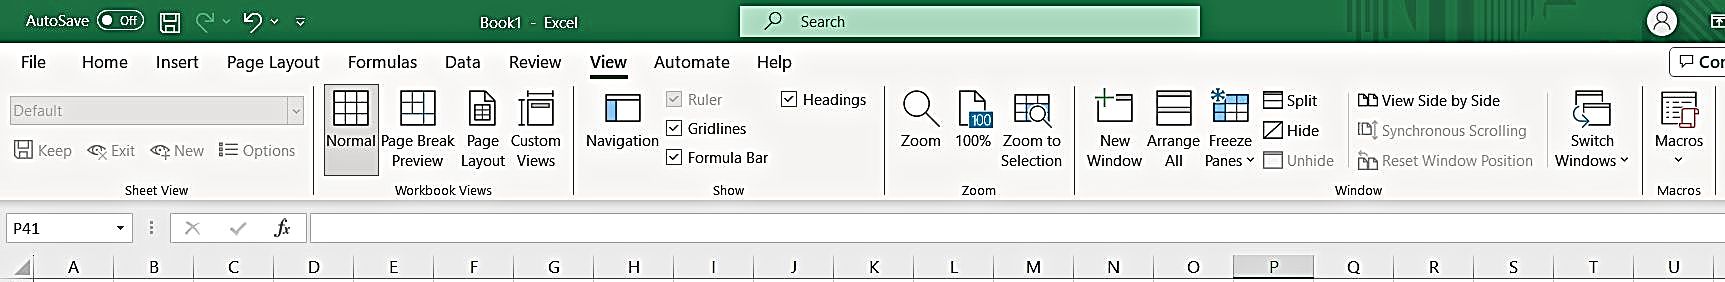 View Ribbon Tab - Excel Hippo, Excel Training Course for Beginners